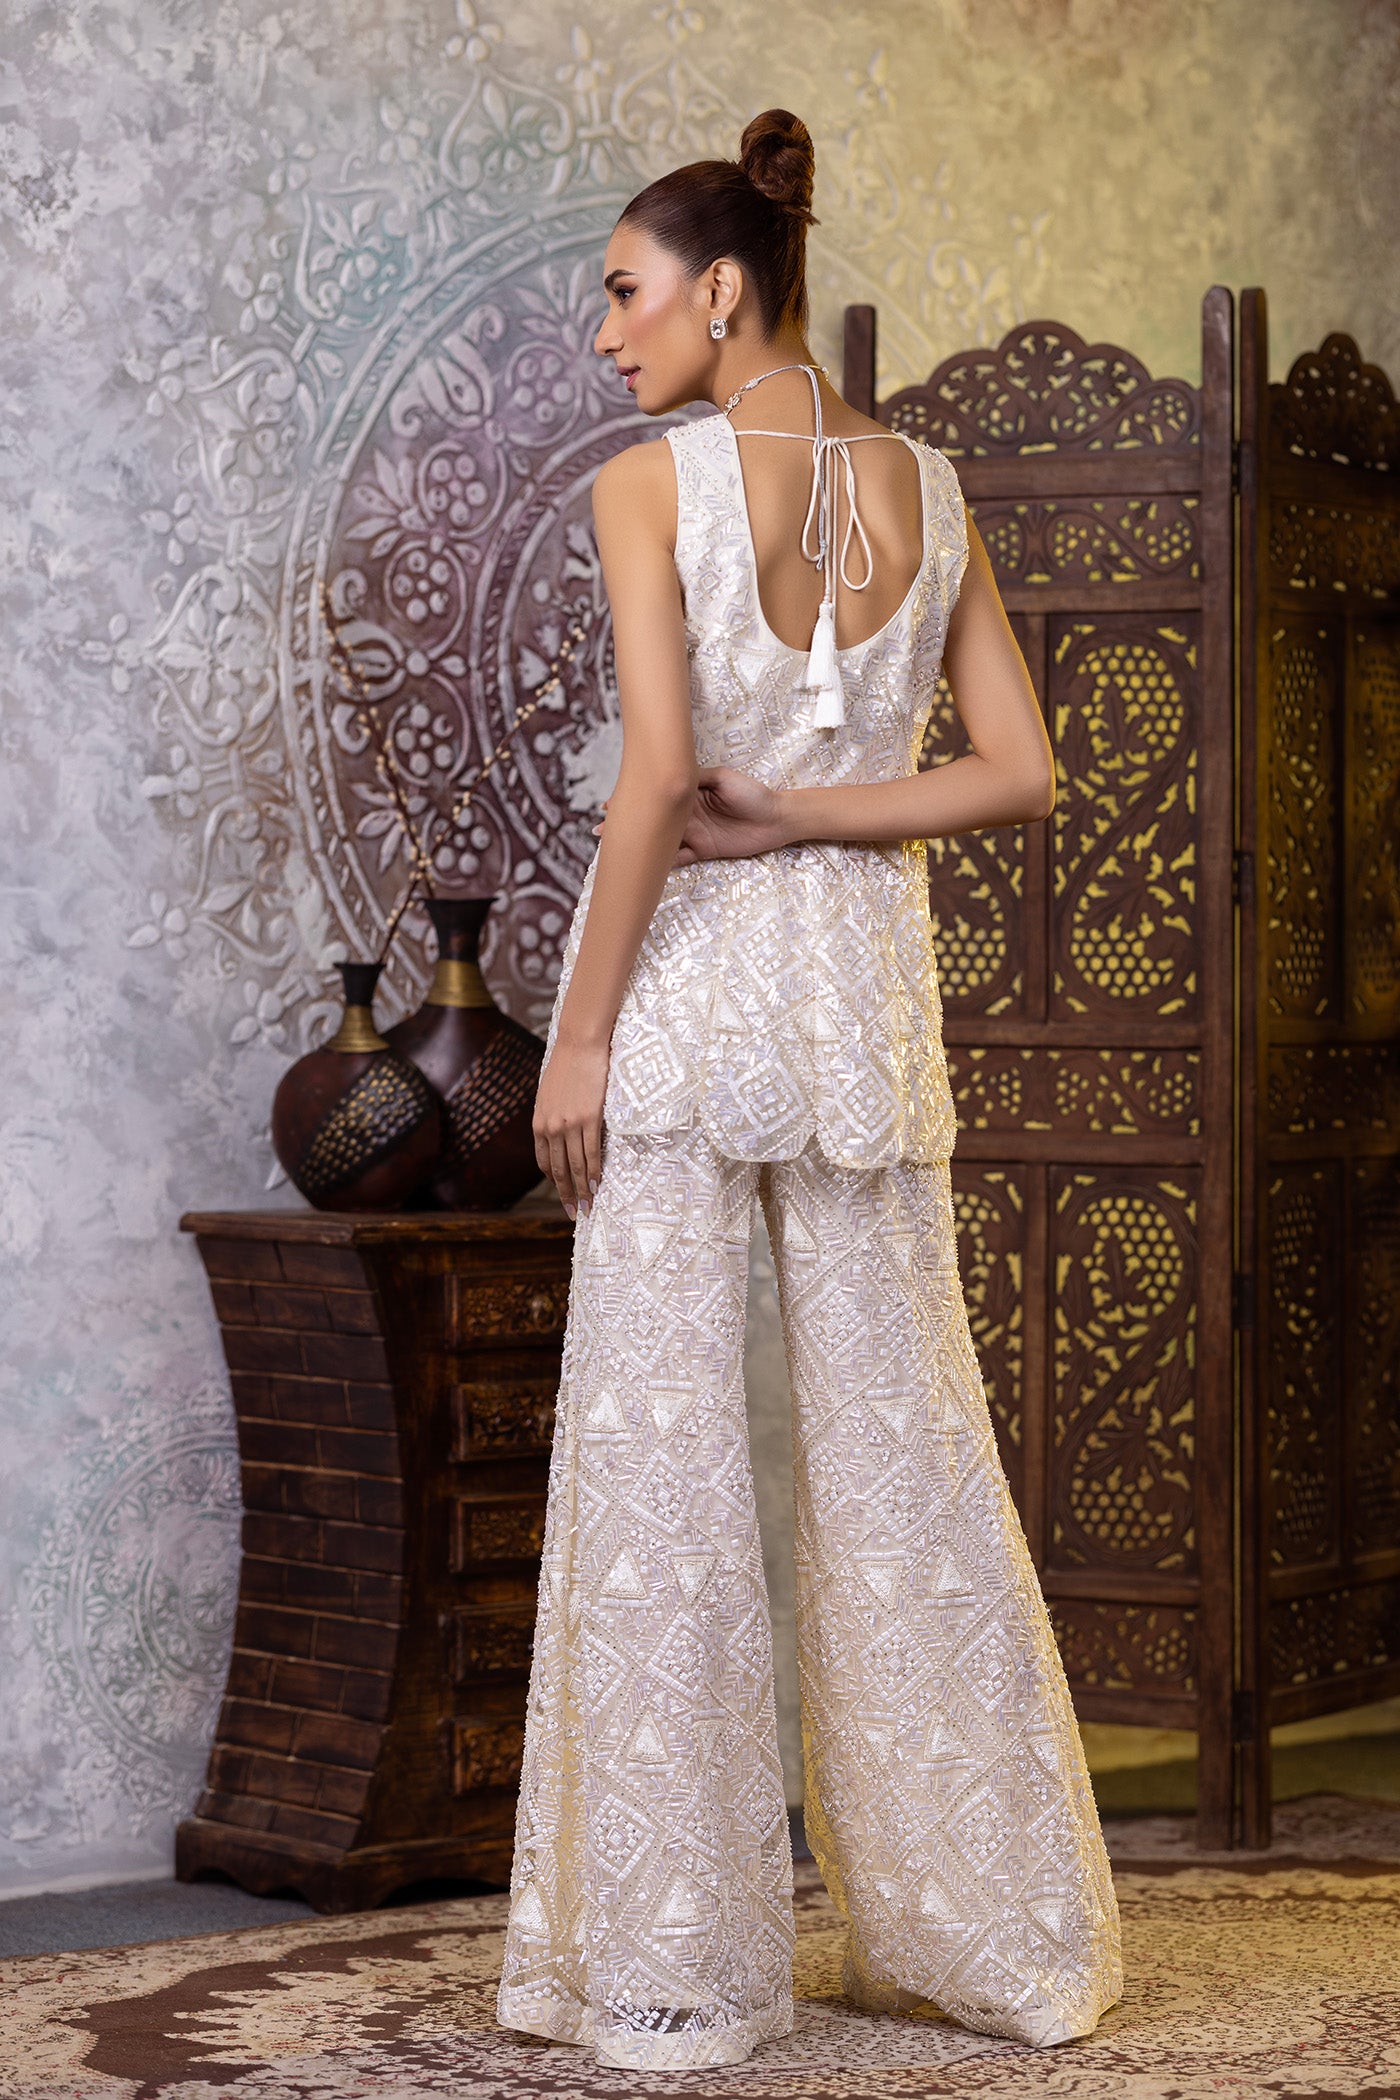 Ivory net sequined peplum with bellbottoms